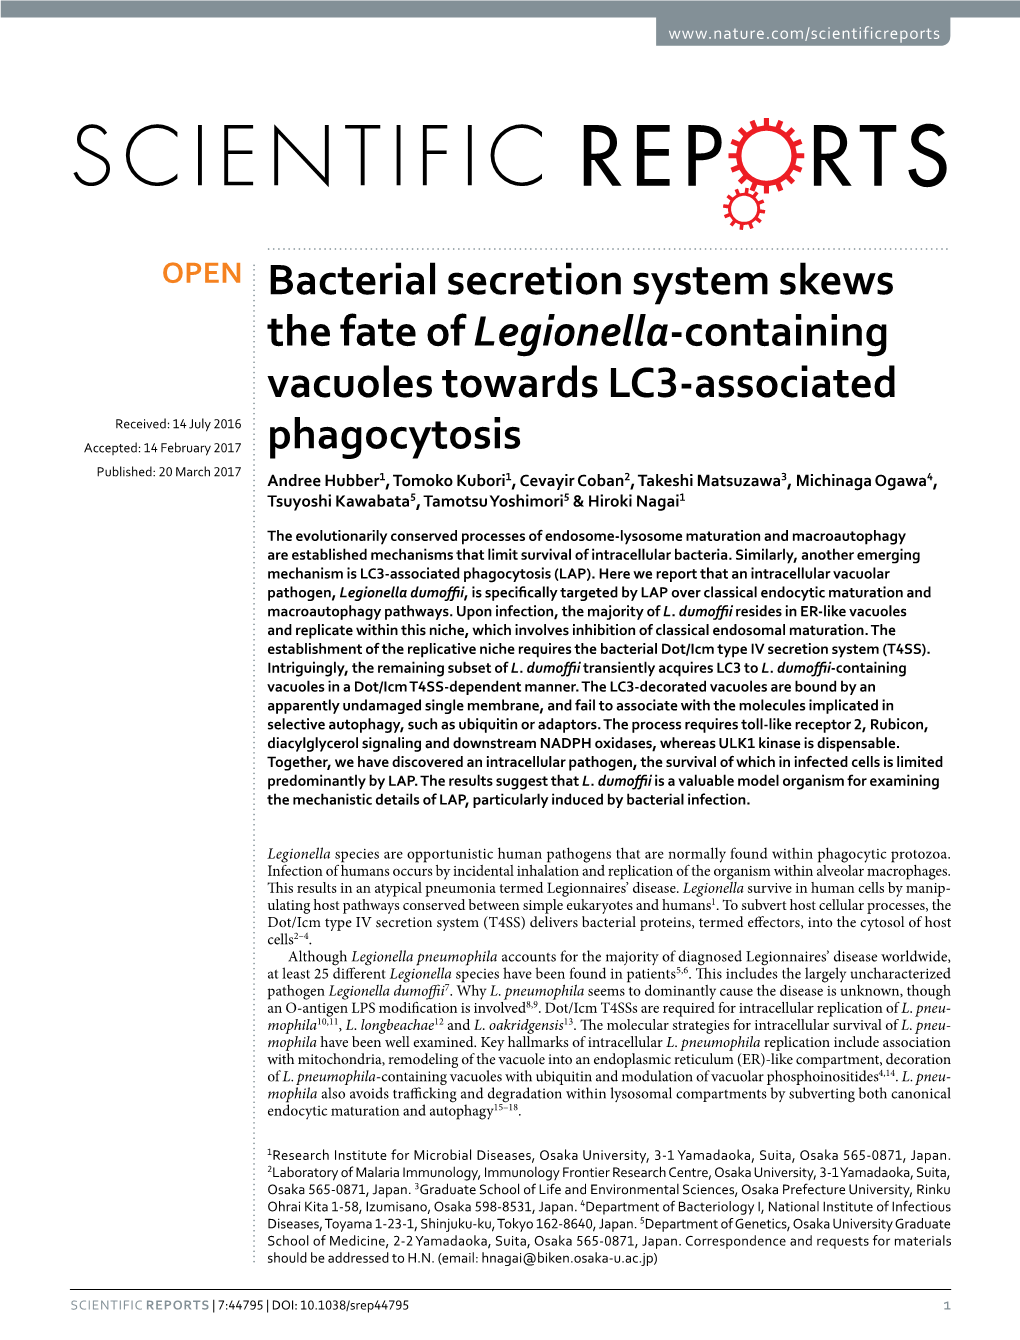 Bacterial Secretion System Skews the Fate of Legionella-Containing Vacuoles Towards LC3-Associated Phagocytosis